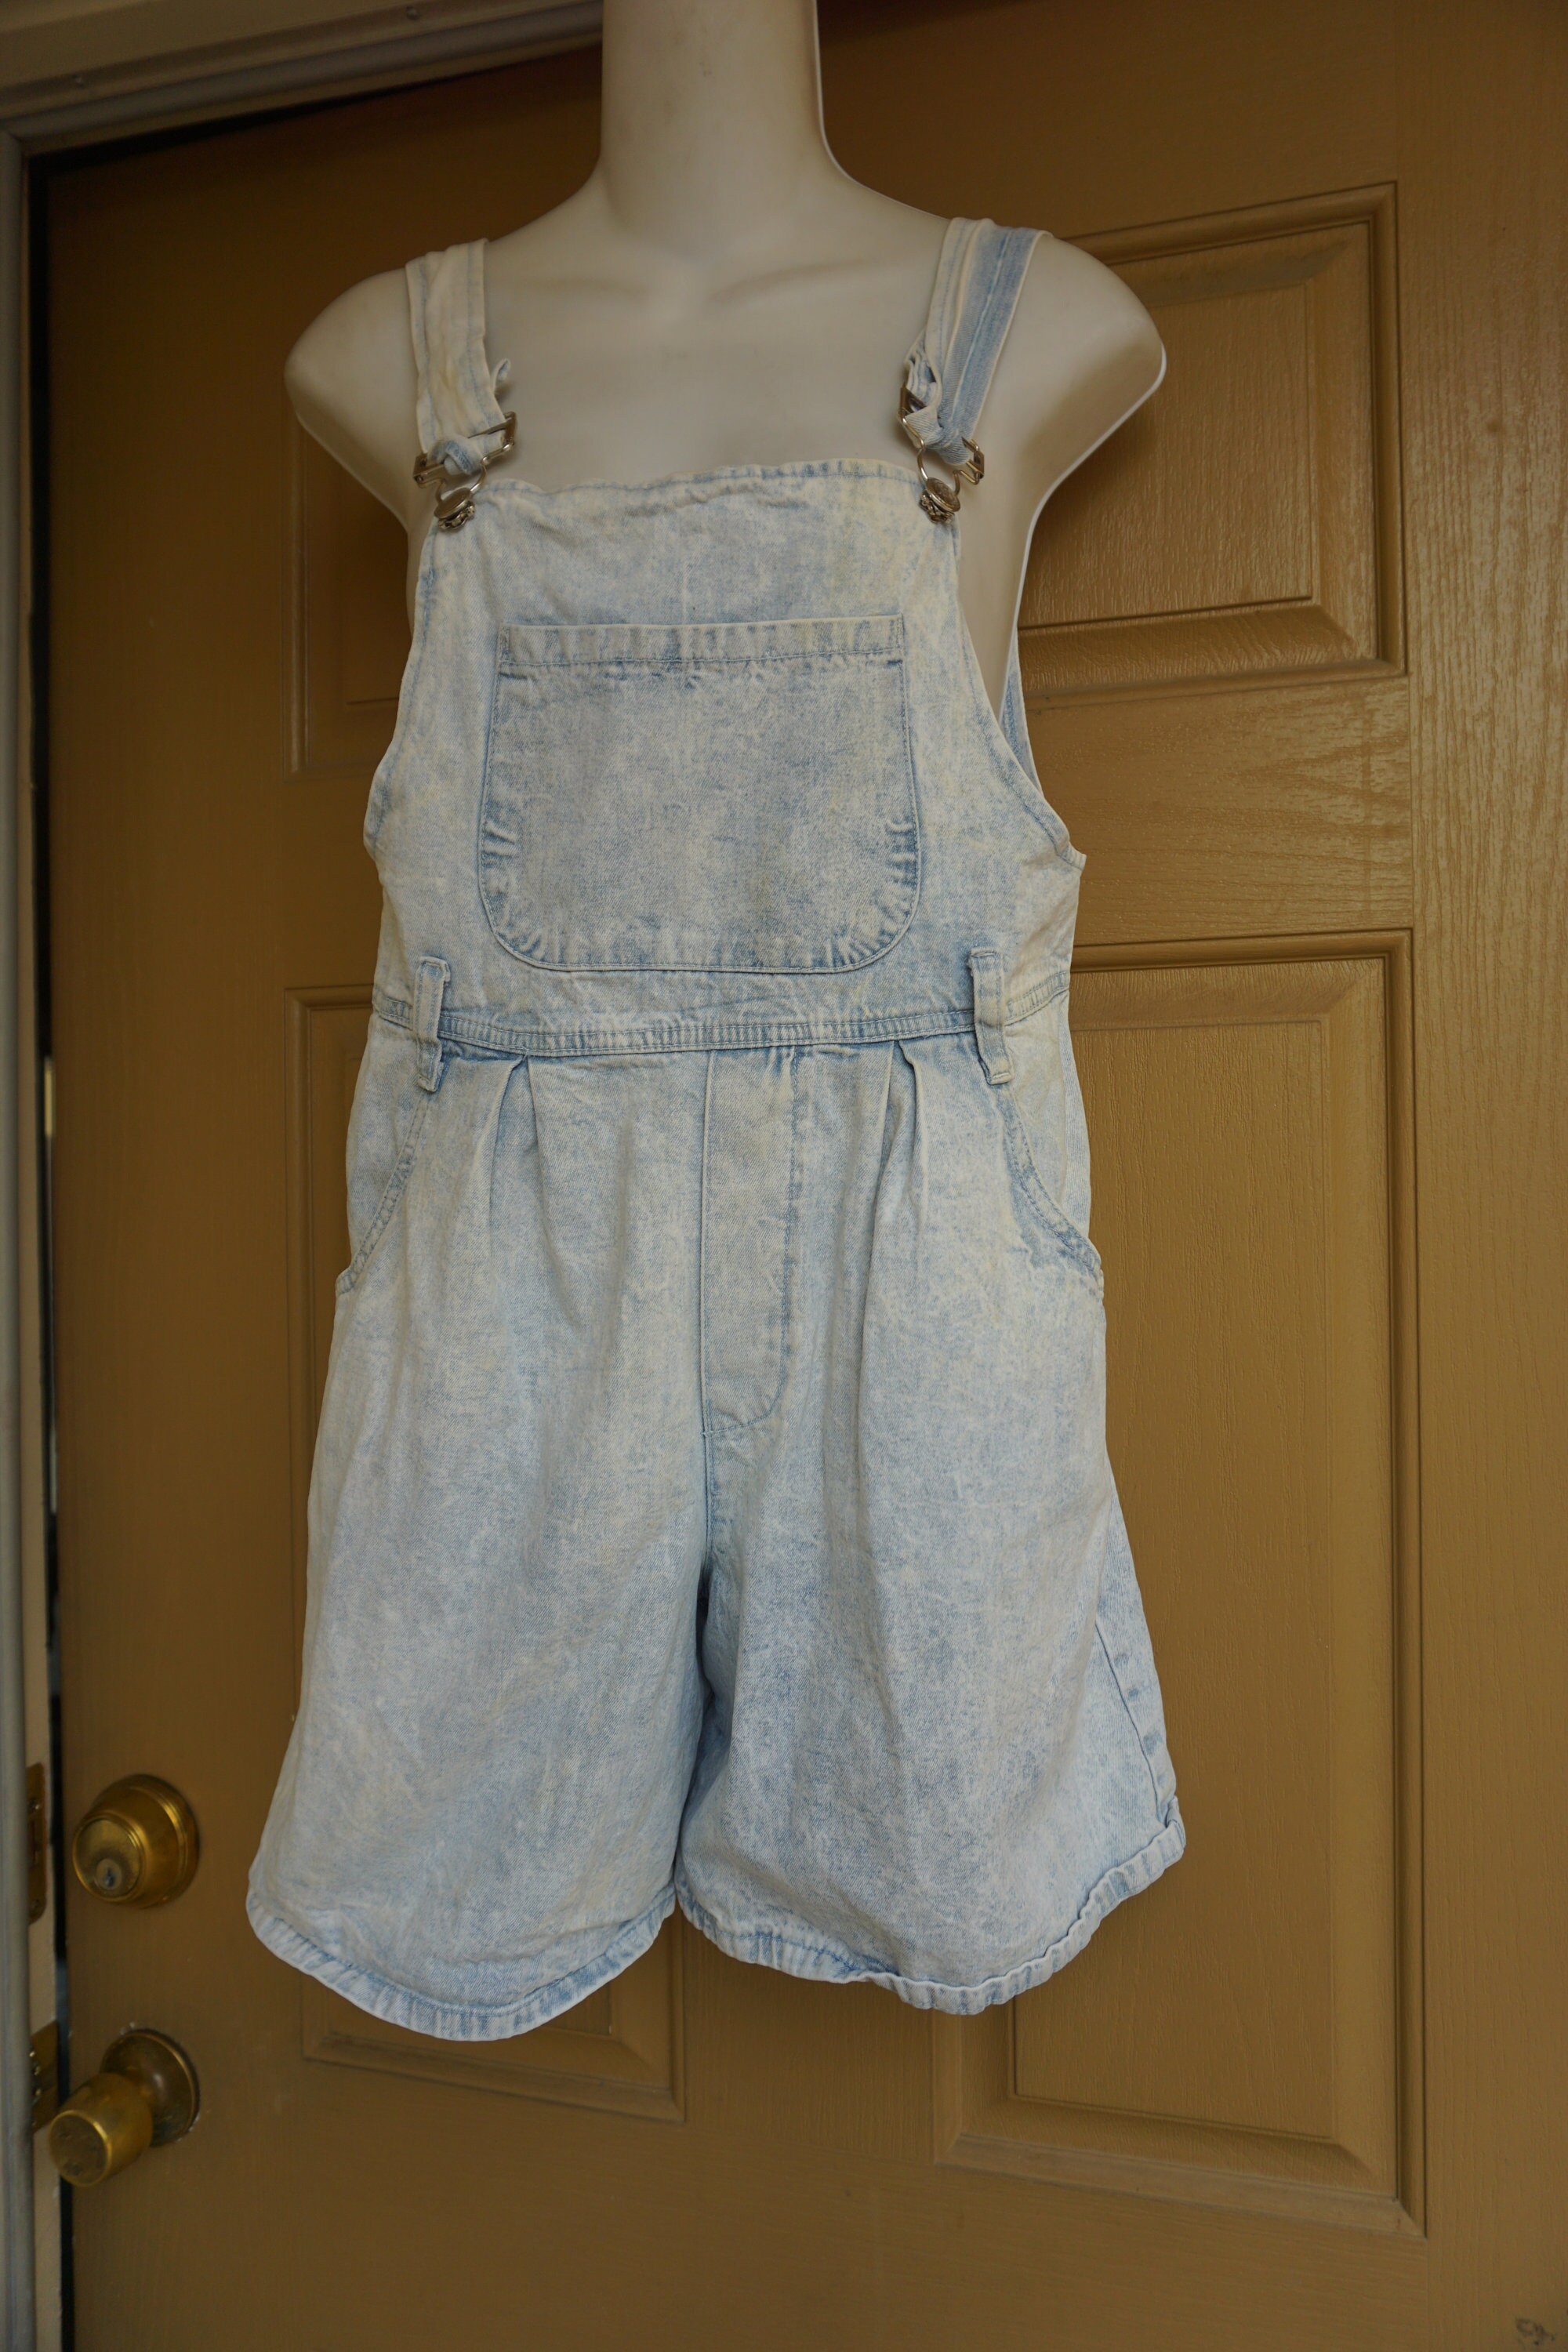 SHORTS Vintage 1990s pastel blue shorts overalls size S Small | Etsy